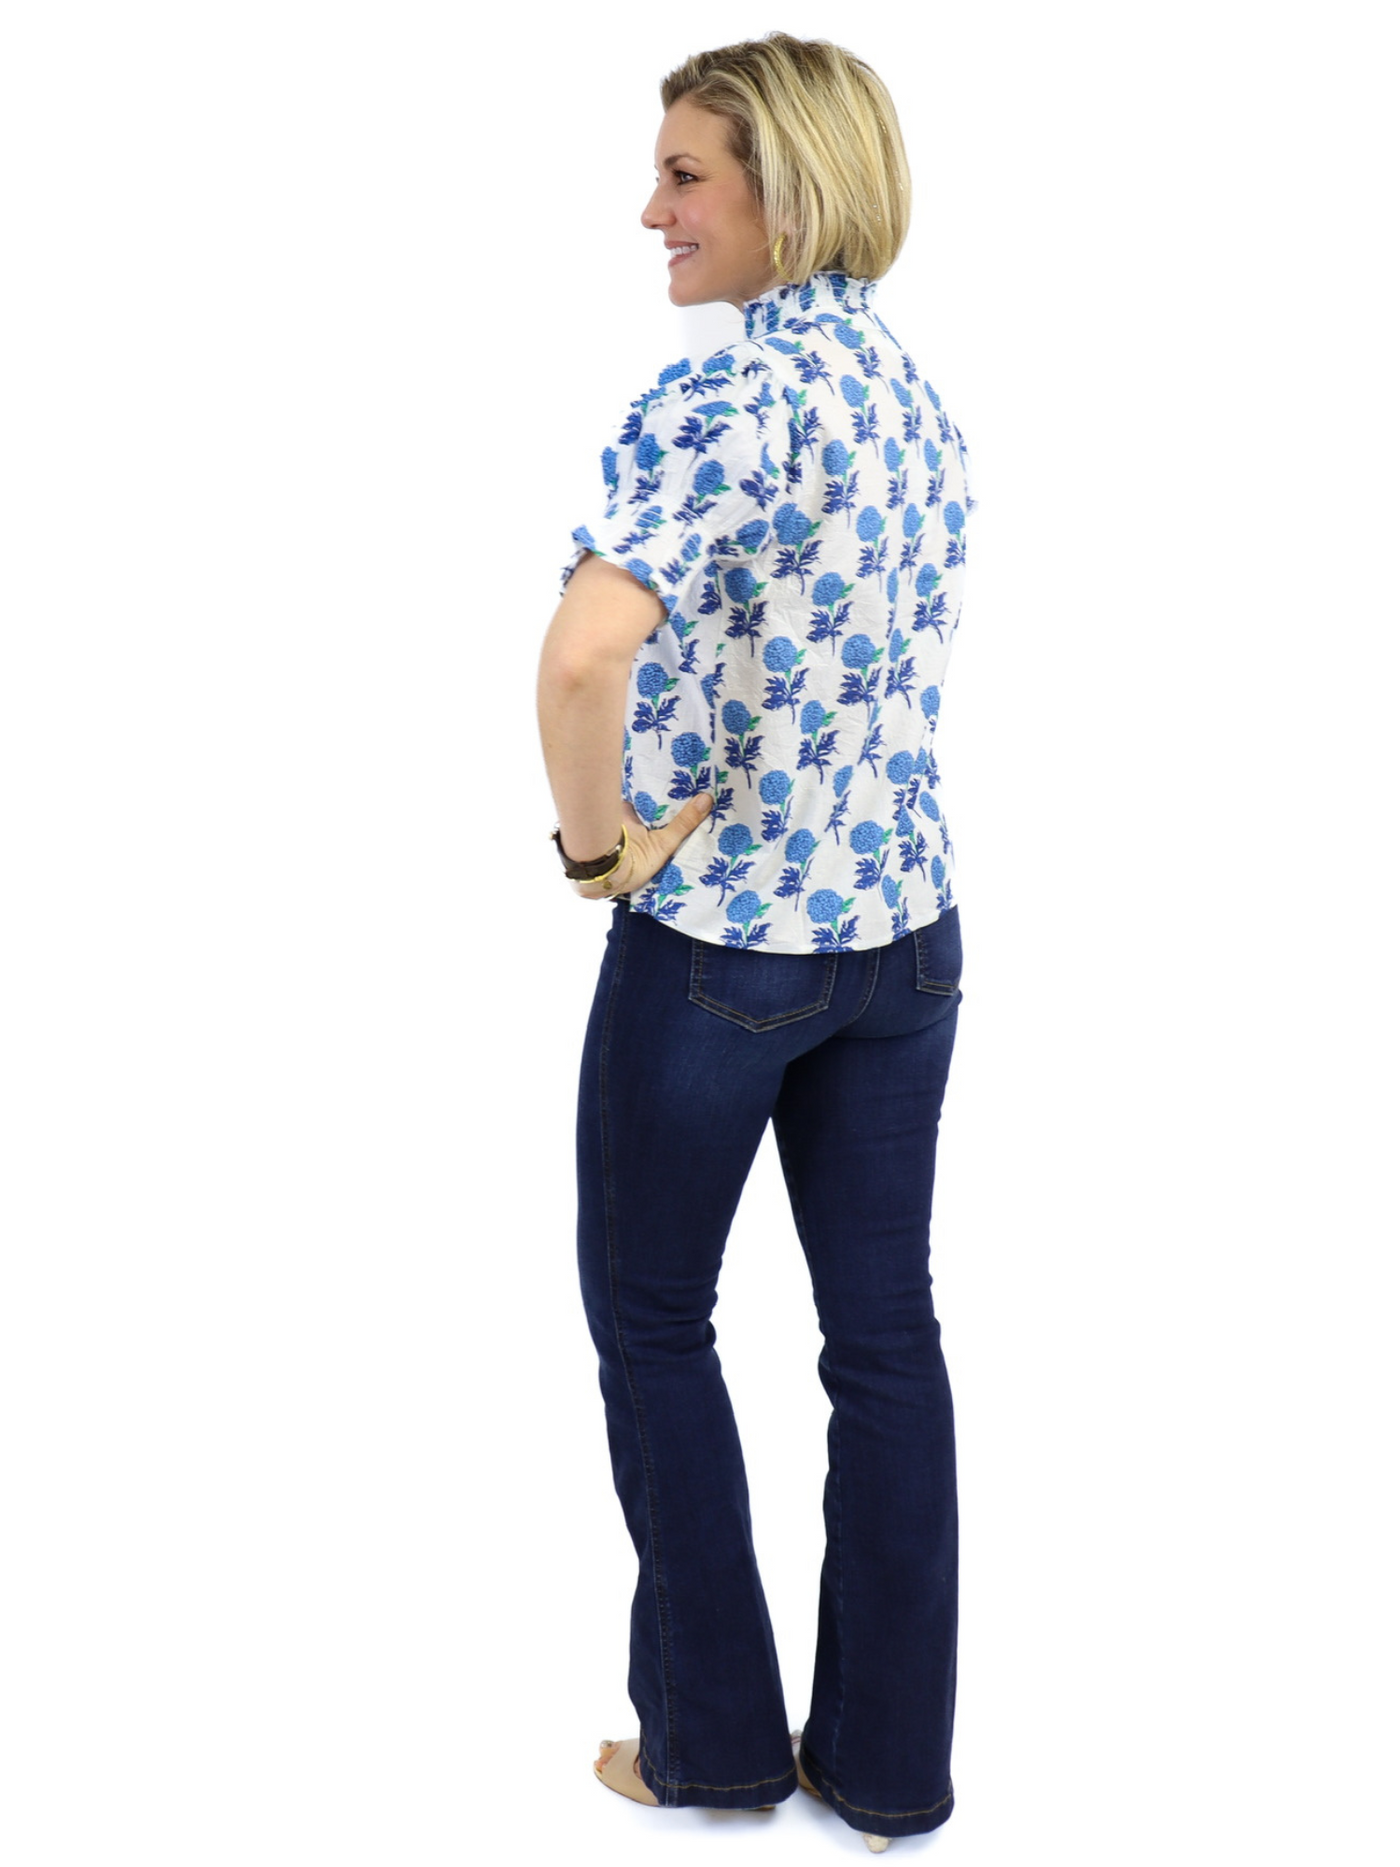 THML Blue Hydrangea Top - Blue/White back view with Spanx Jeans